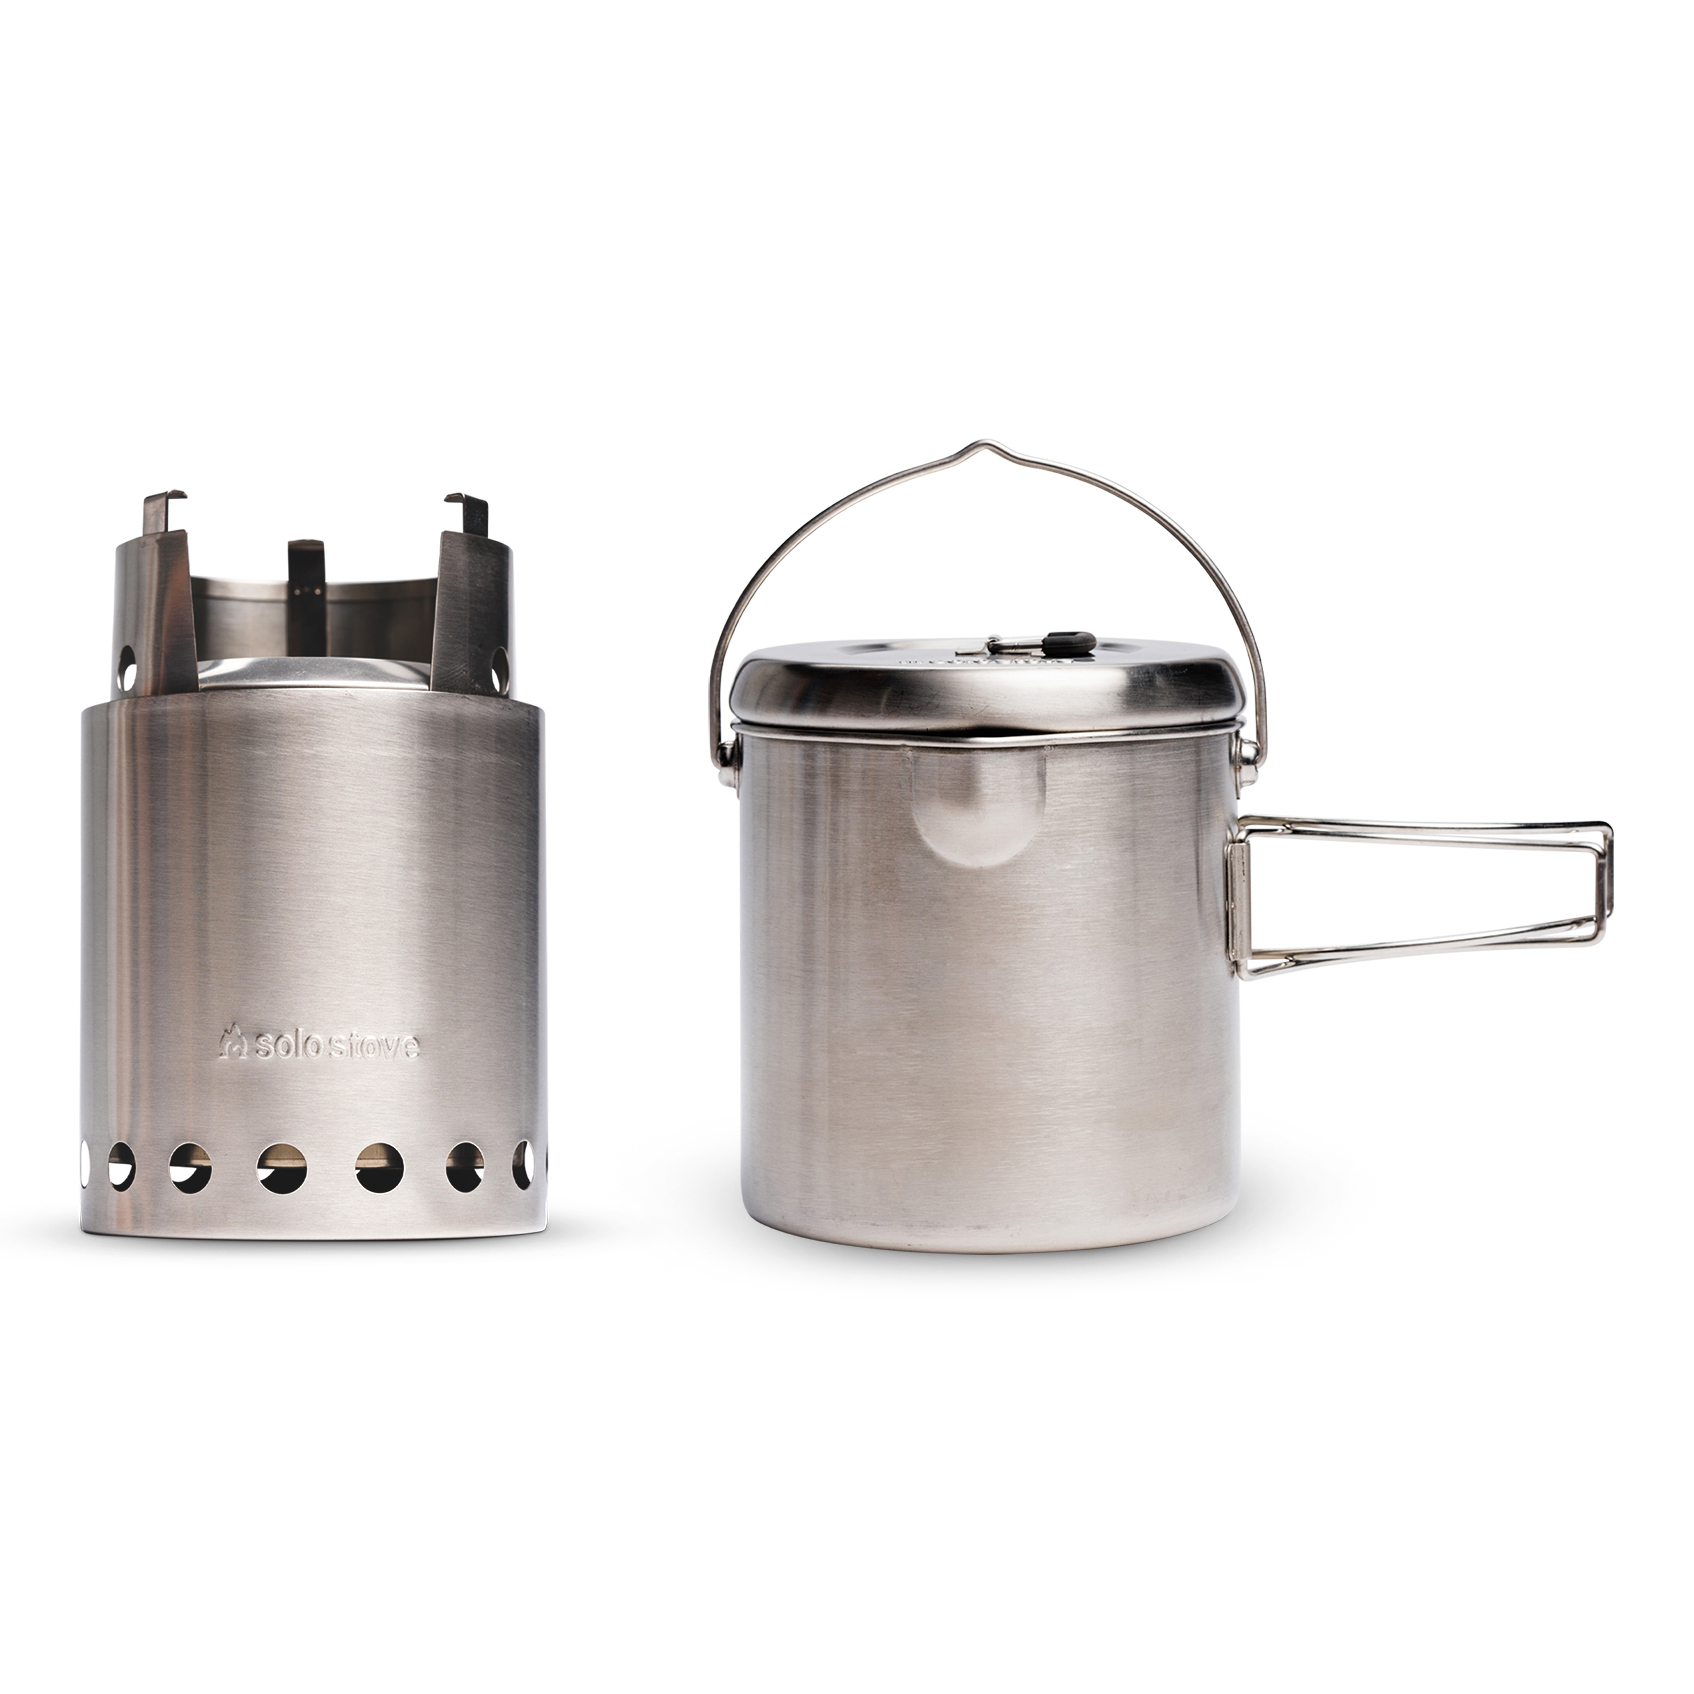 Solo Stove Titan Camp Stove + Pot 1800 - Stainless Steel 